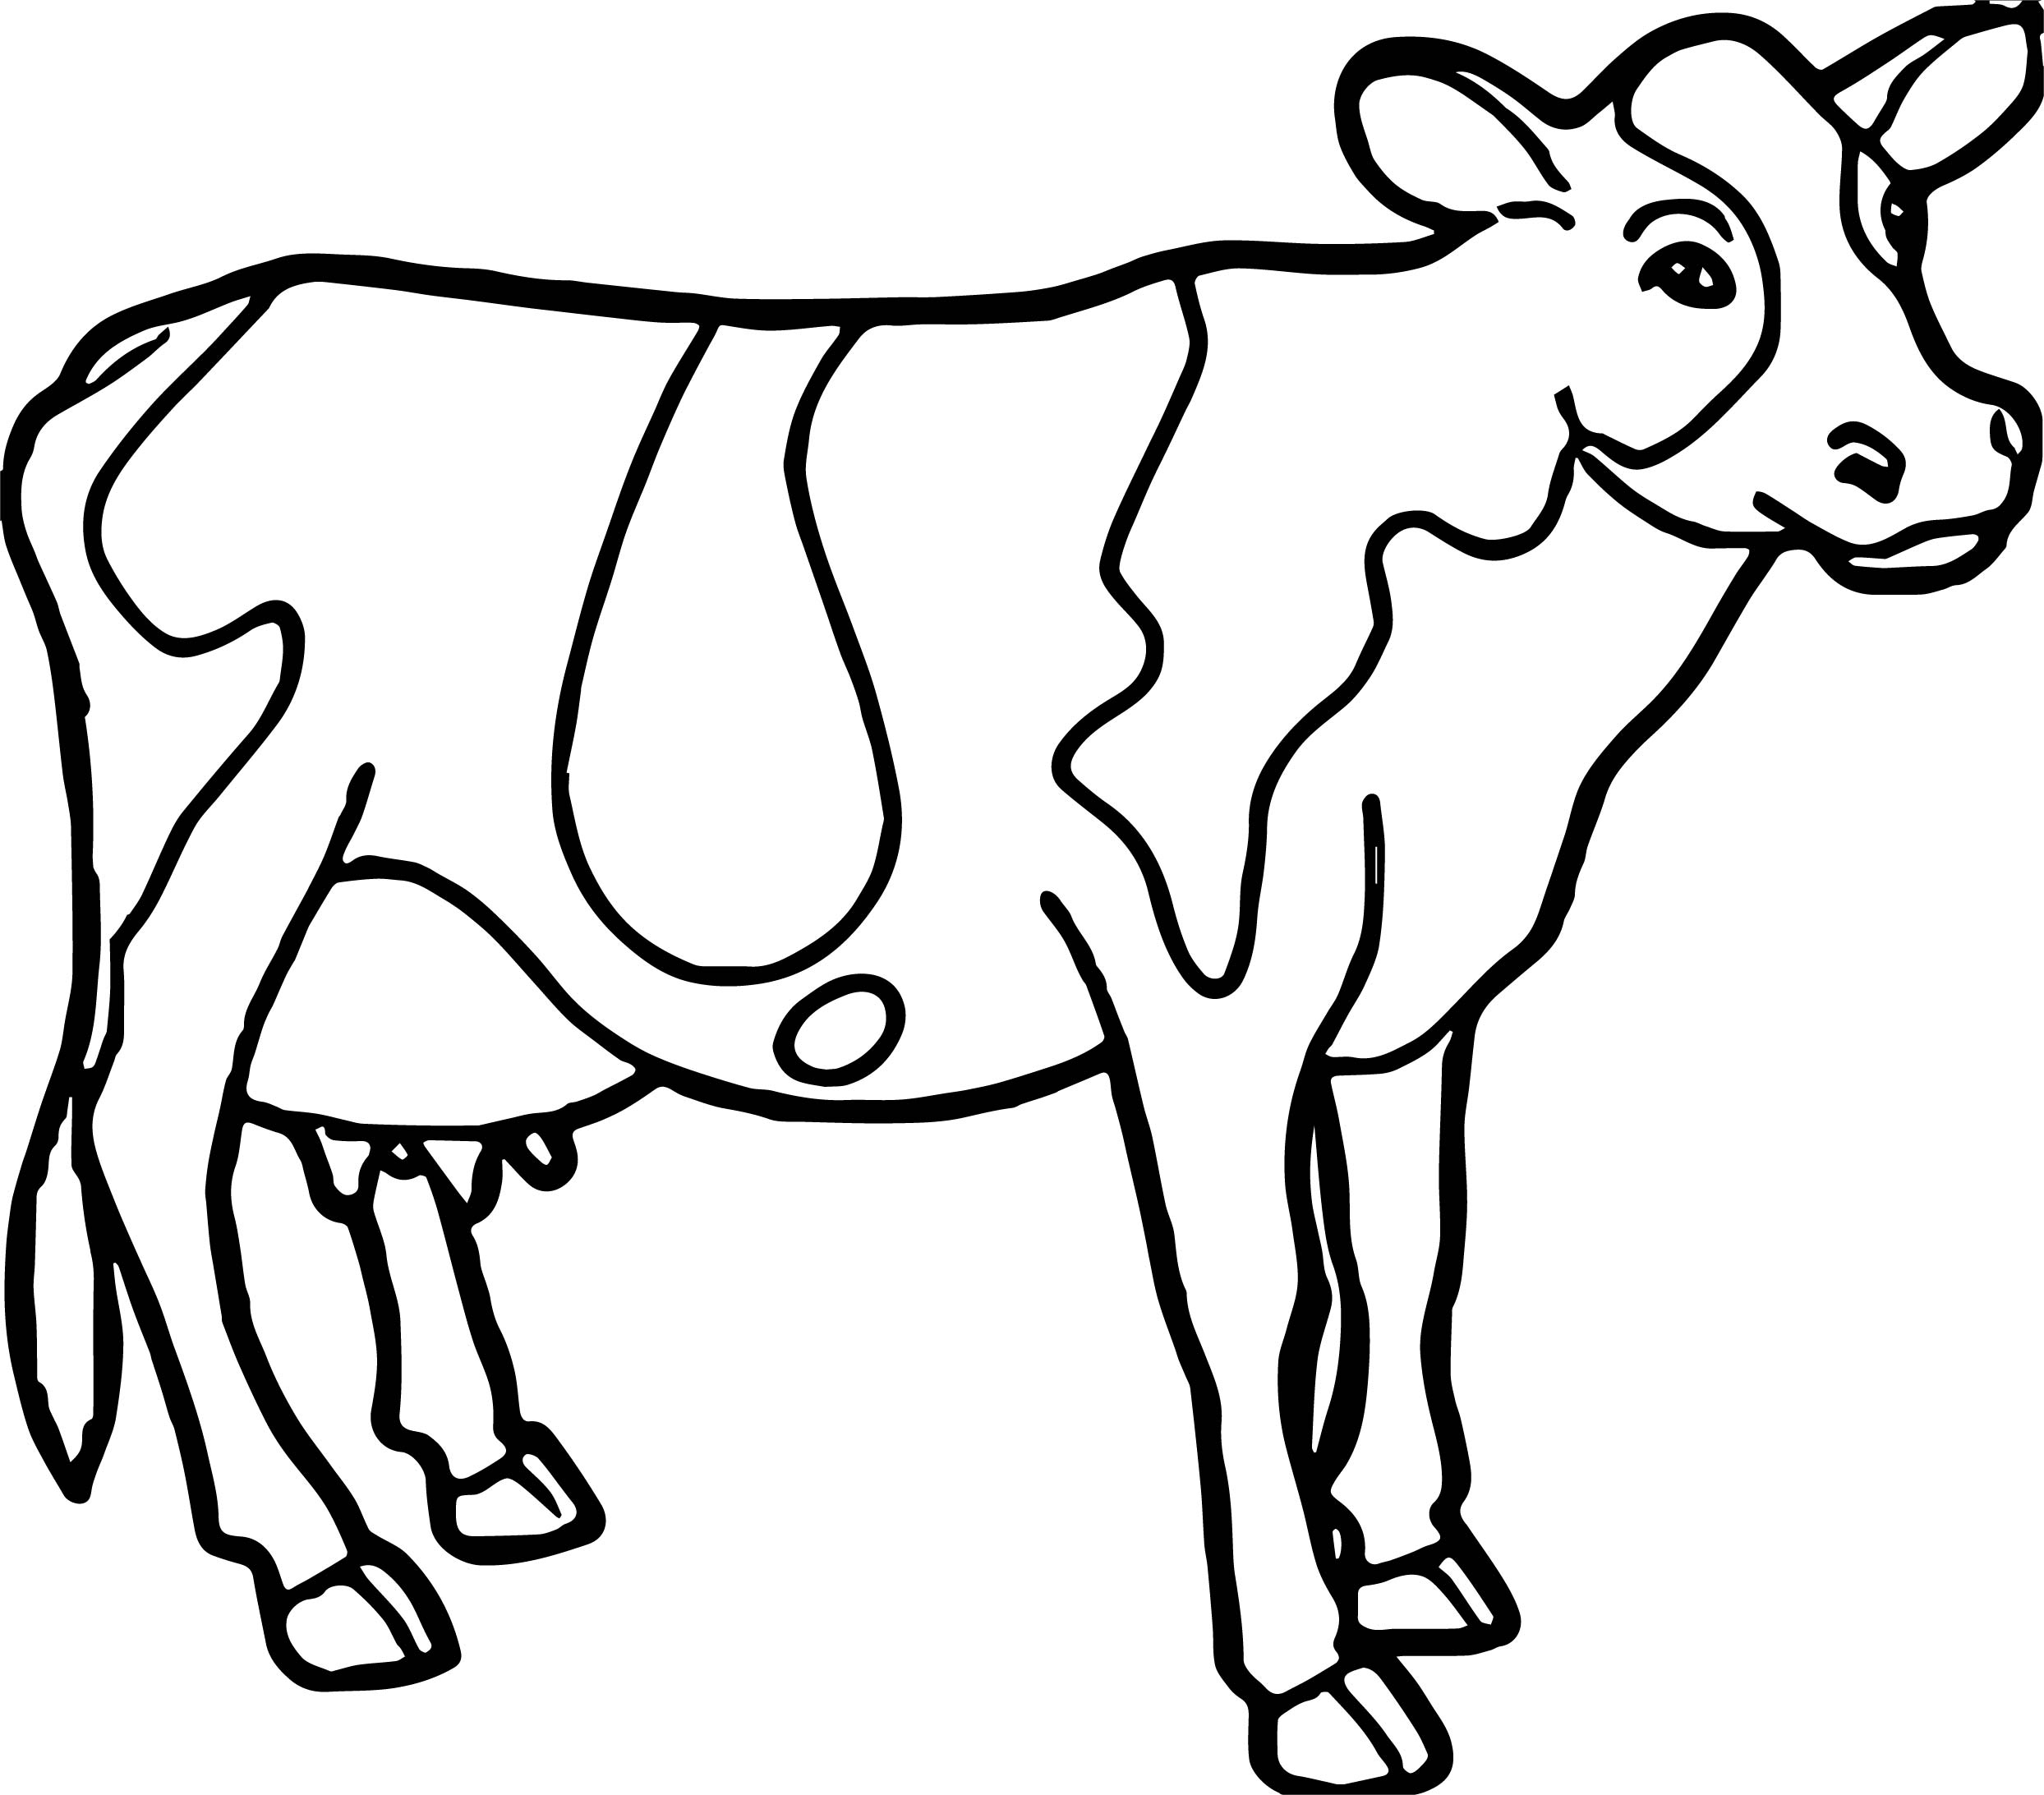 Cow Coloring Pages For Adults At Getcoloringscom Free Printable Cow 